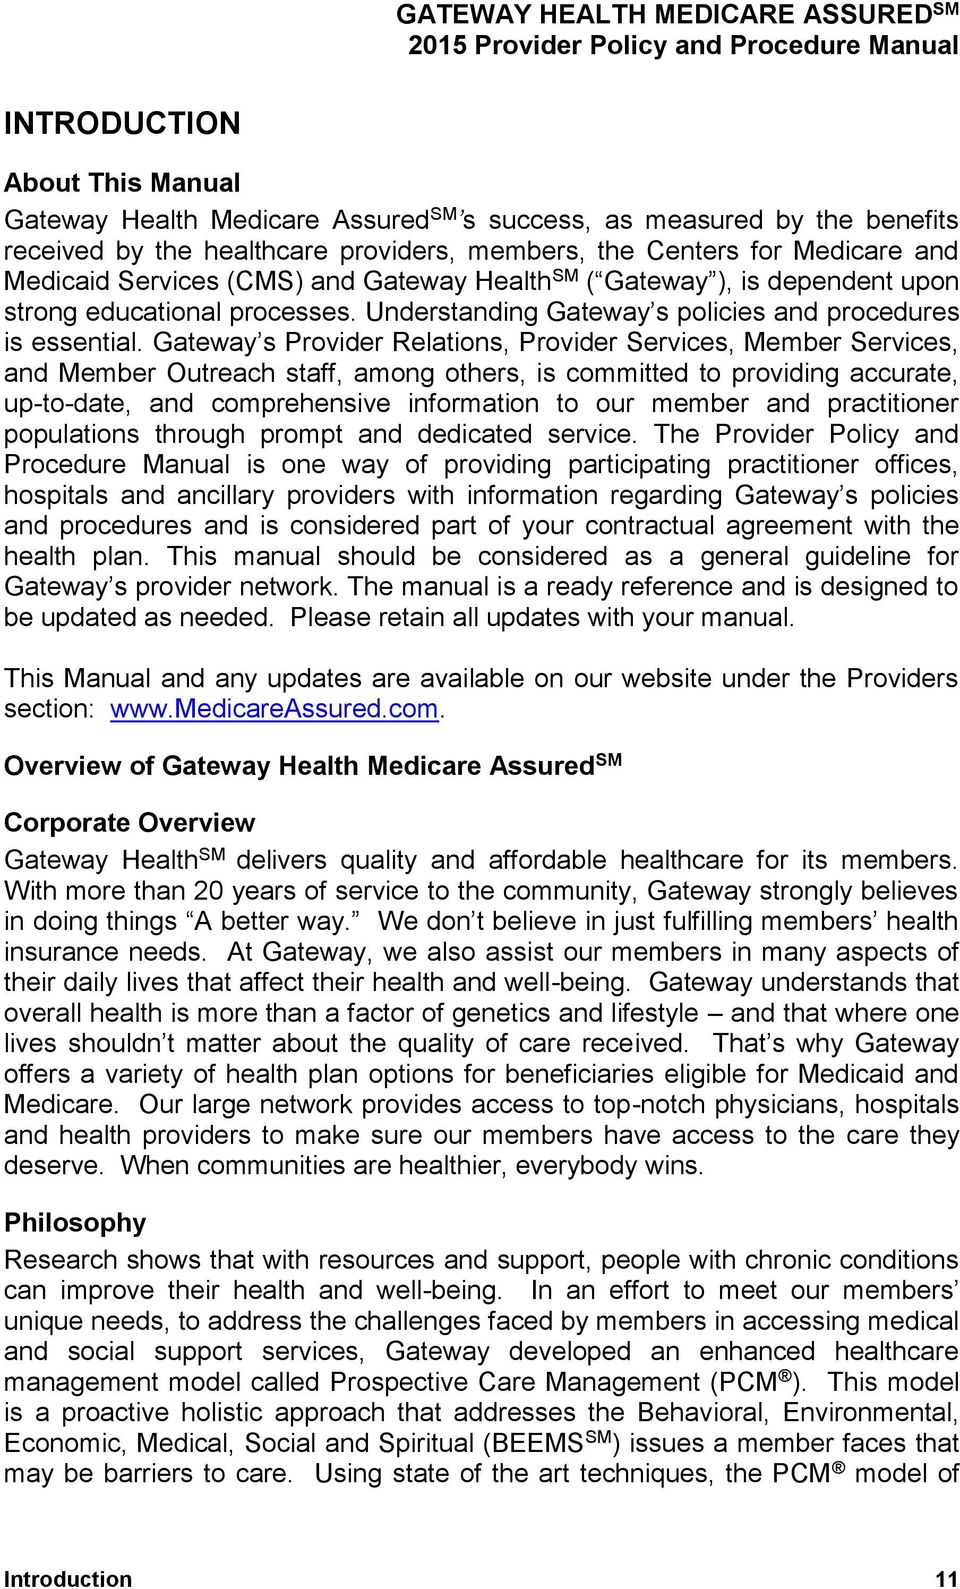 Gateway s Provider Relations, Provider Services, Member Services, and Member Outreach staff, among others, is committed to providing accurate, up-to-date, and comprehensive information to our member